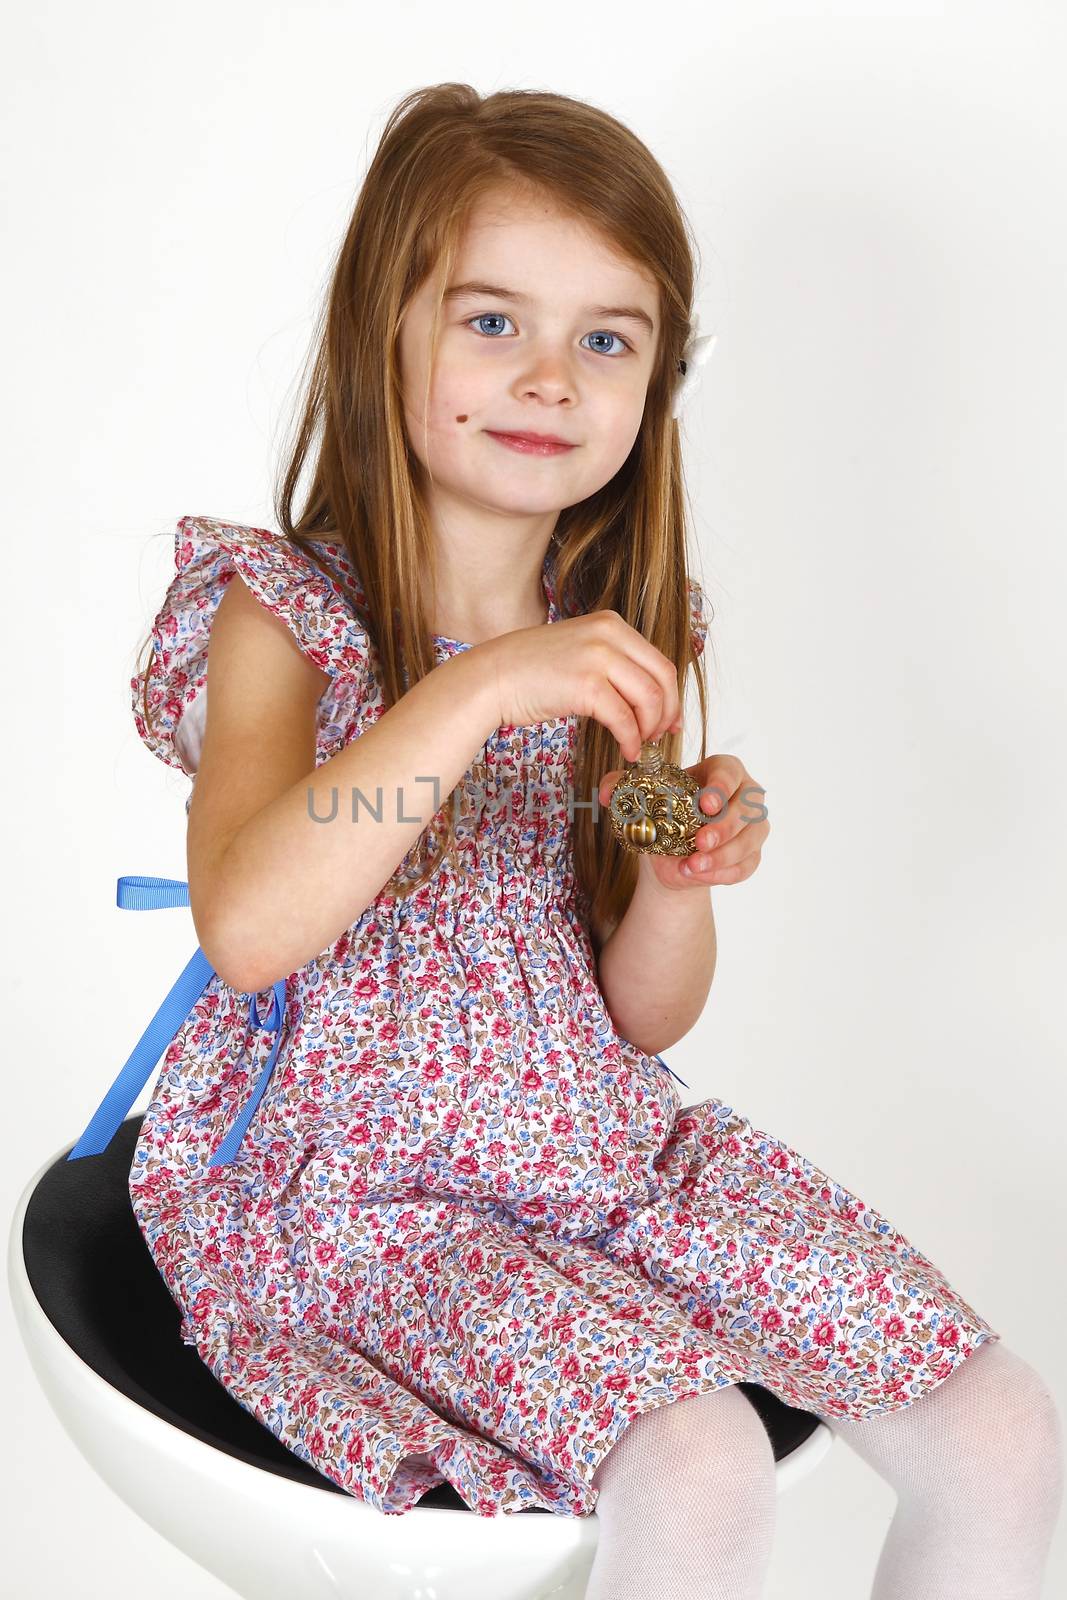 Young smiling girl sitting on a chair. smelling perfume